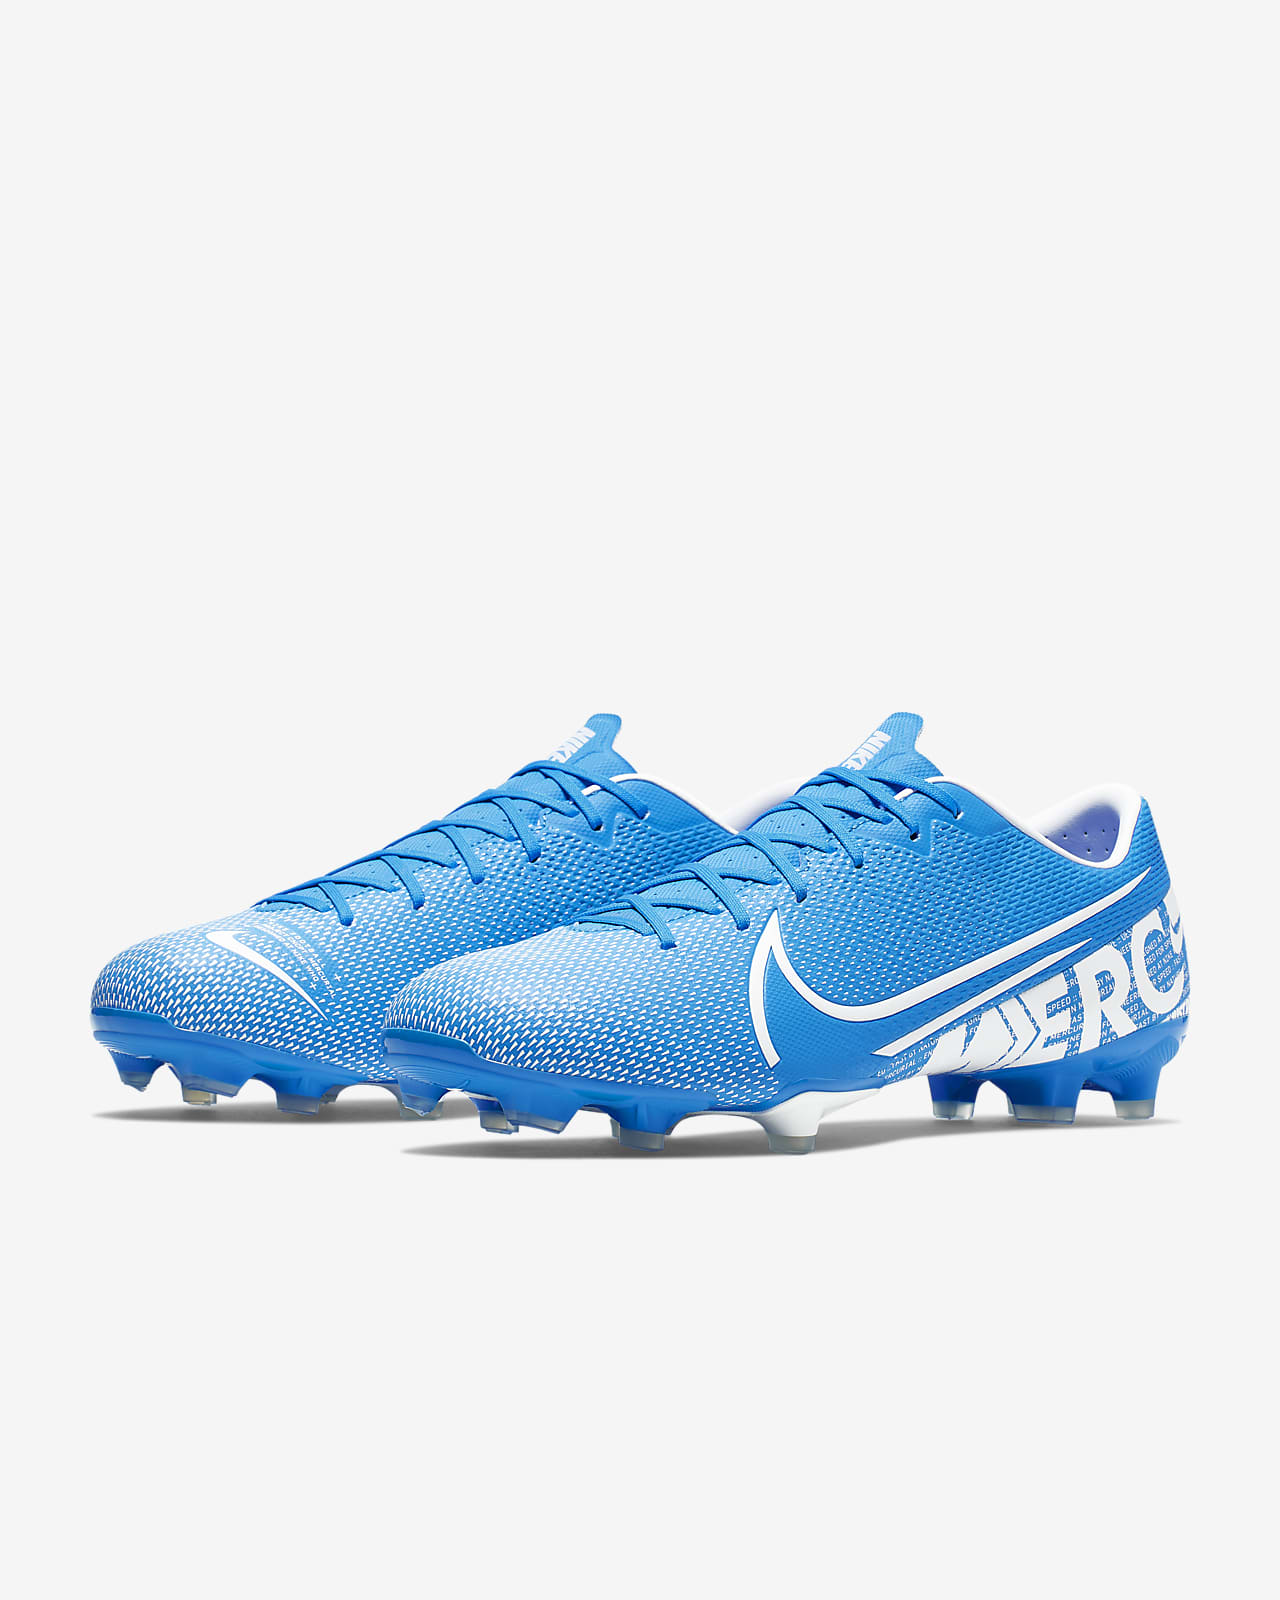 soccer boots nike 2020